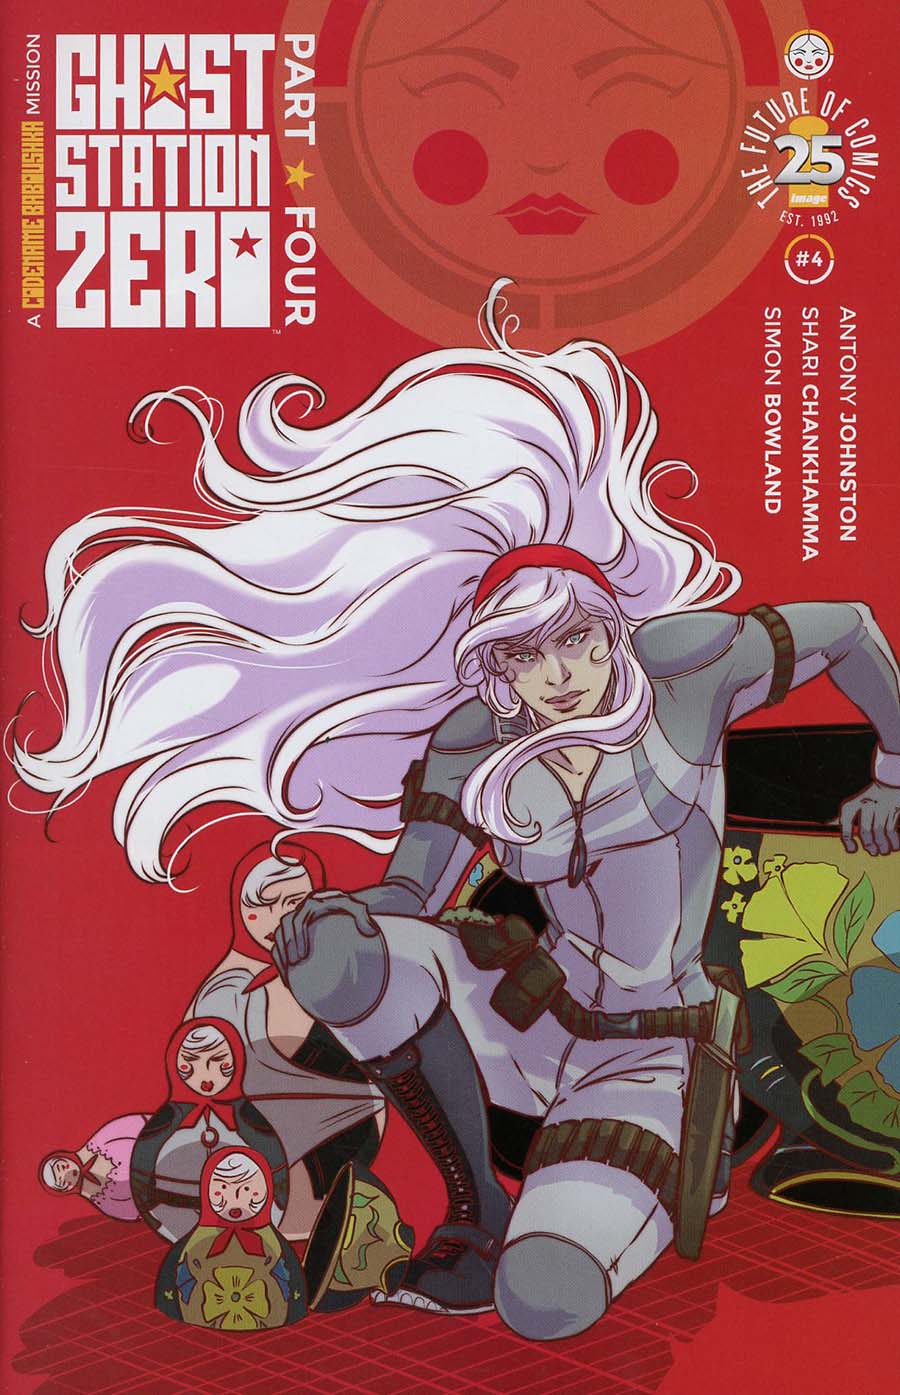 Ghost Station Zero #4 Cover B Variant Emma Vieceli Cover